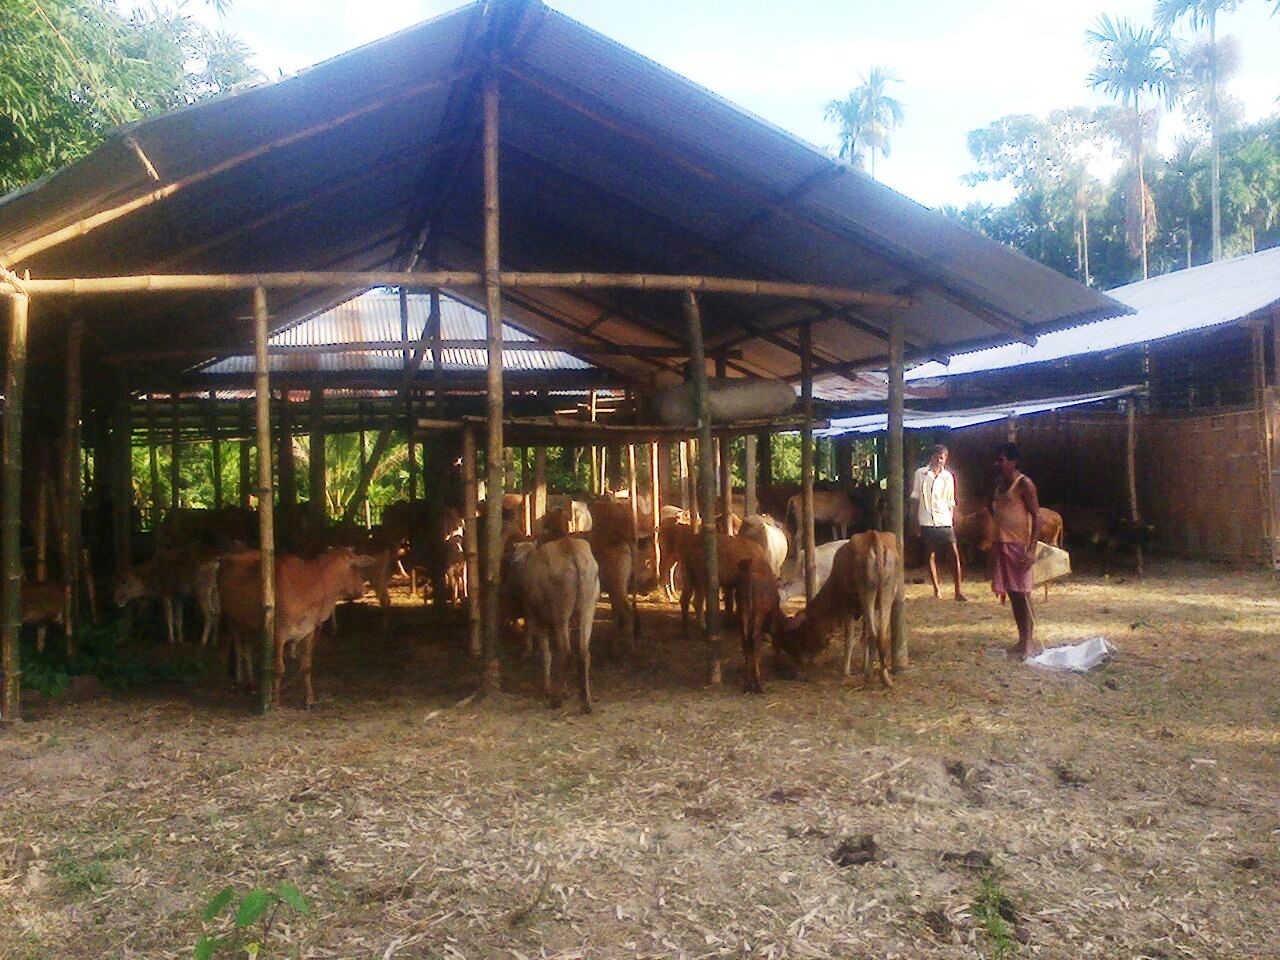 Image 14 and 15: The Highland at Jhapooripather being used by villagers and animals. This Highland proved to be a great boon to the 100-odd families of this village as they could take shelter here during the flood.